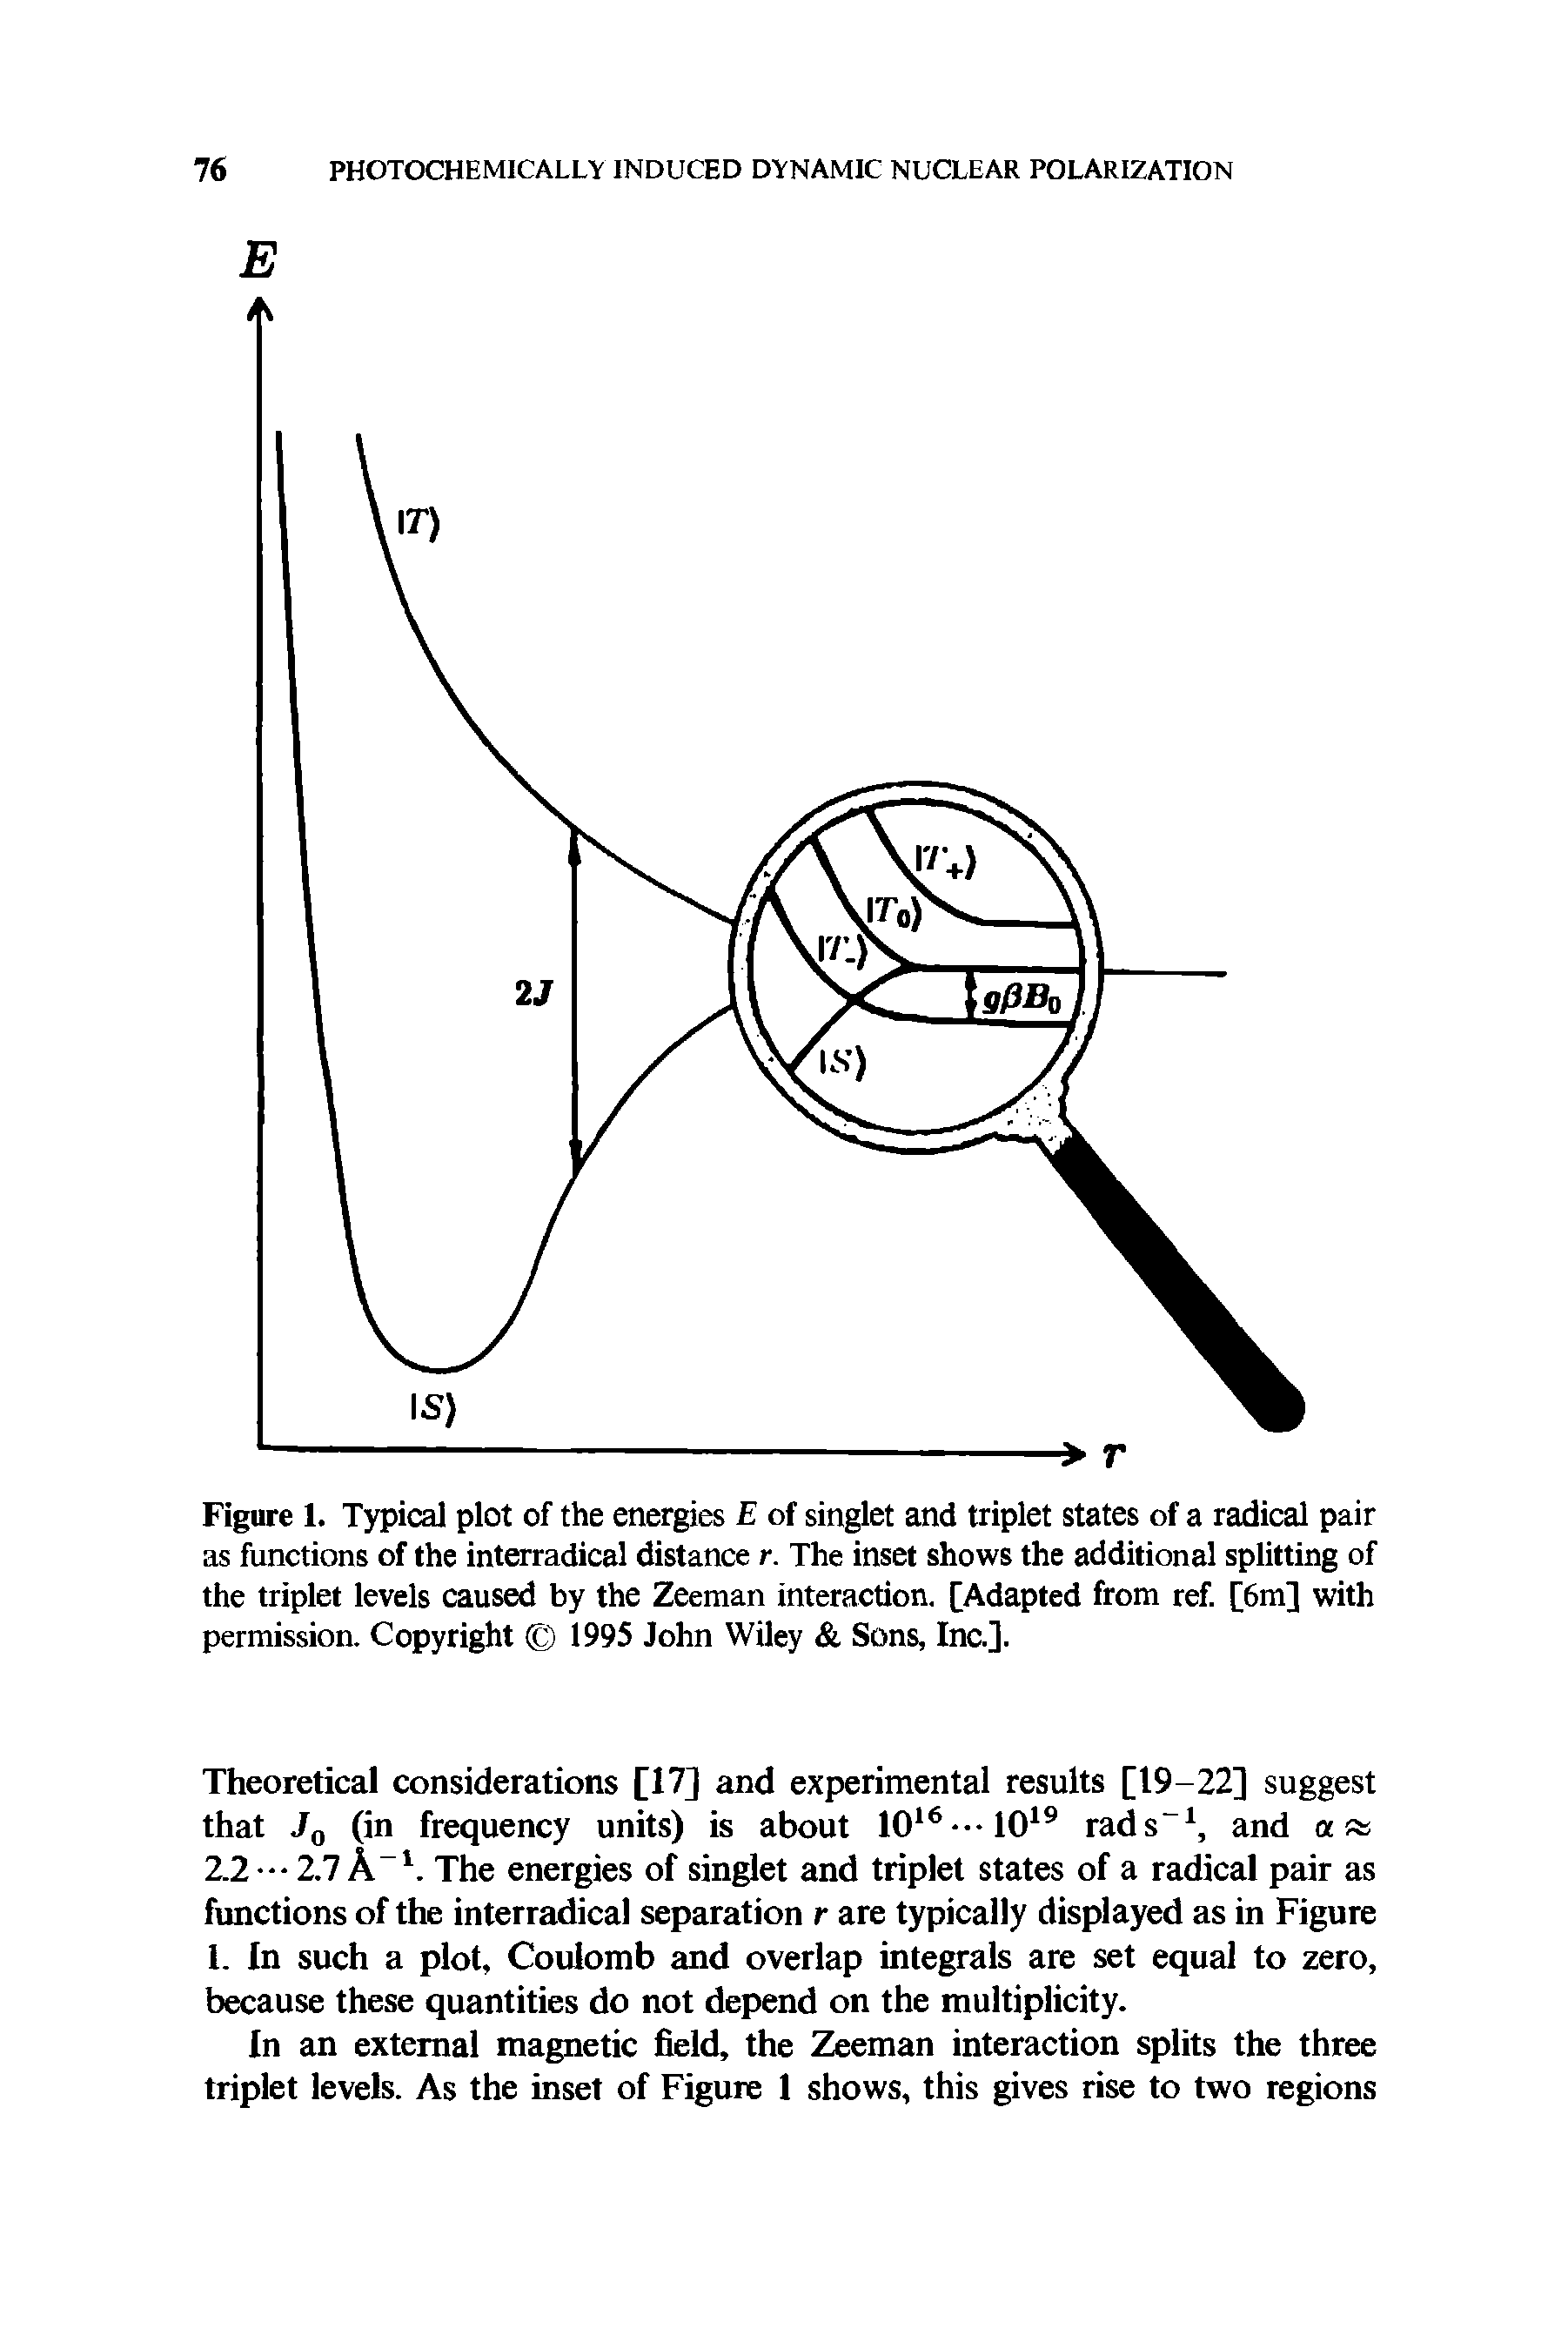 Figure 1. Typical plot of the energies E of singlet and triplet states of a radical pair as functions of the interradical distance r. The inset shows the additional splitting of the triplet levels caused by the Zeeman interaction. [Adapted from ref. [6m] with permission. Copyright 1995 John Wiley Sons, Inc.].